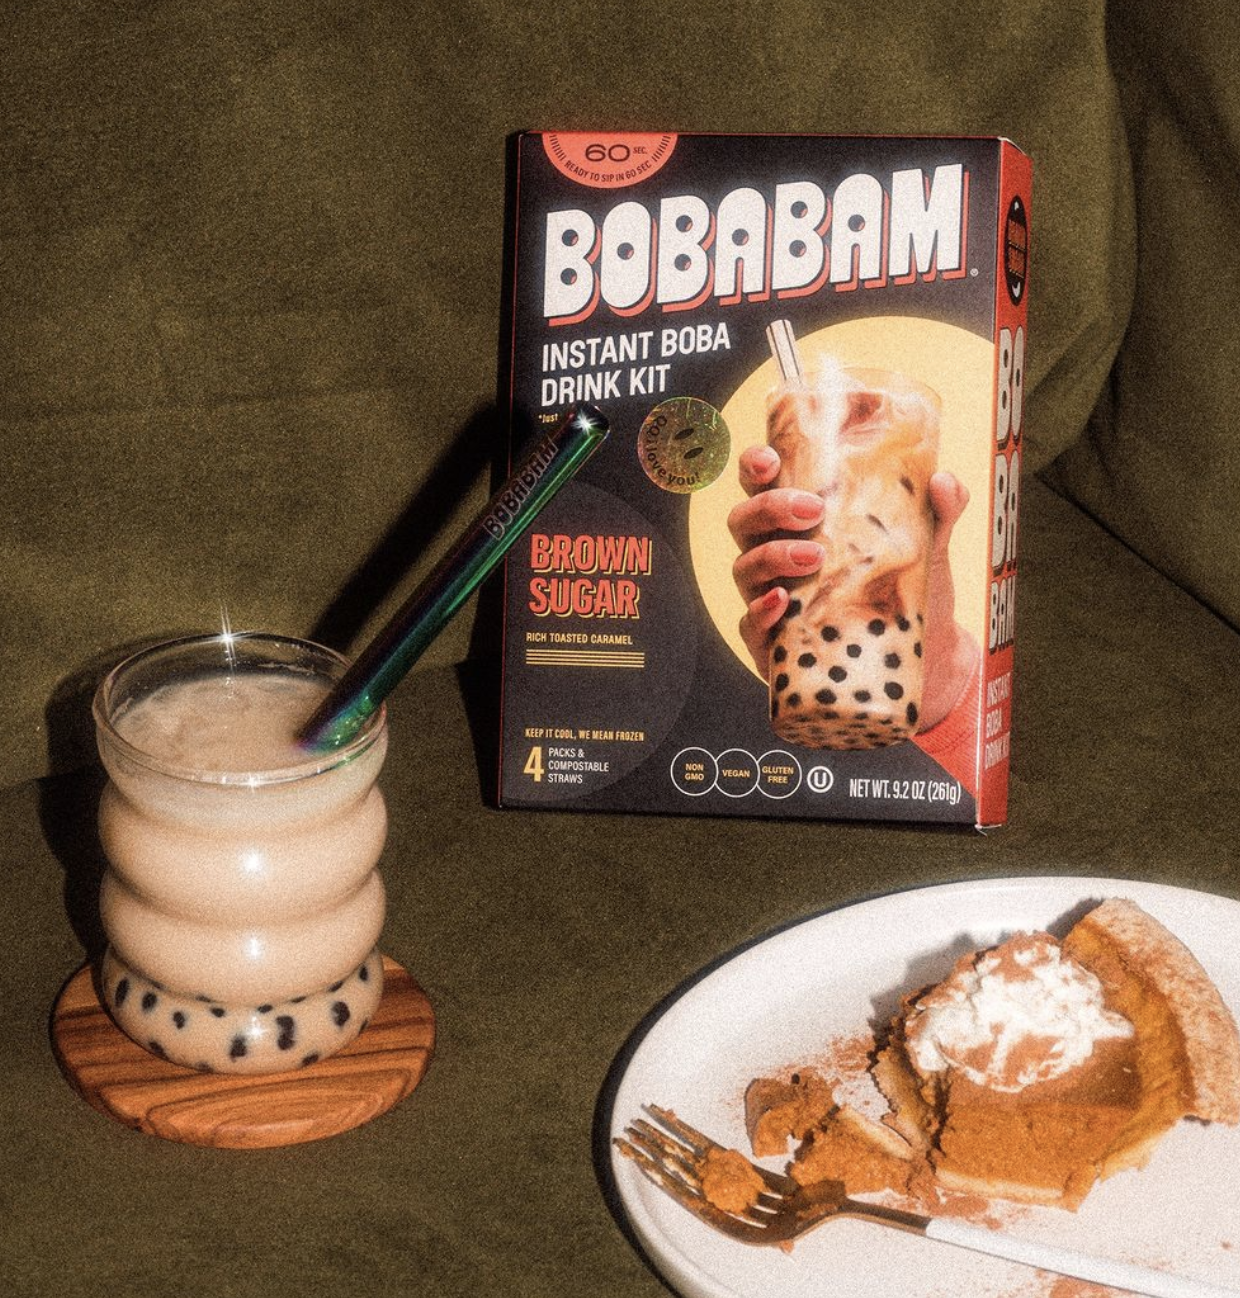 Brown sugar boba pack next to glass of drink and pumpkin pie.